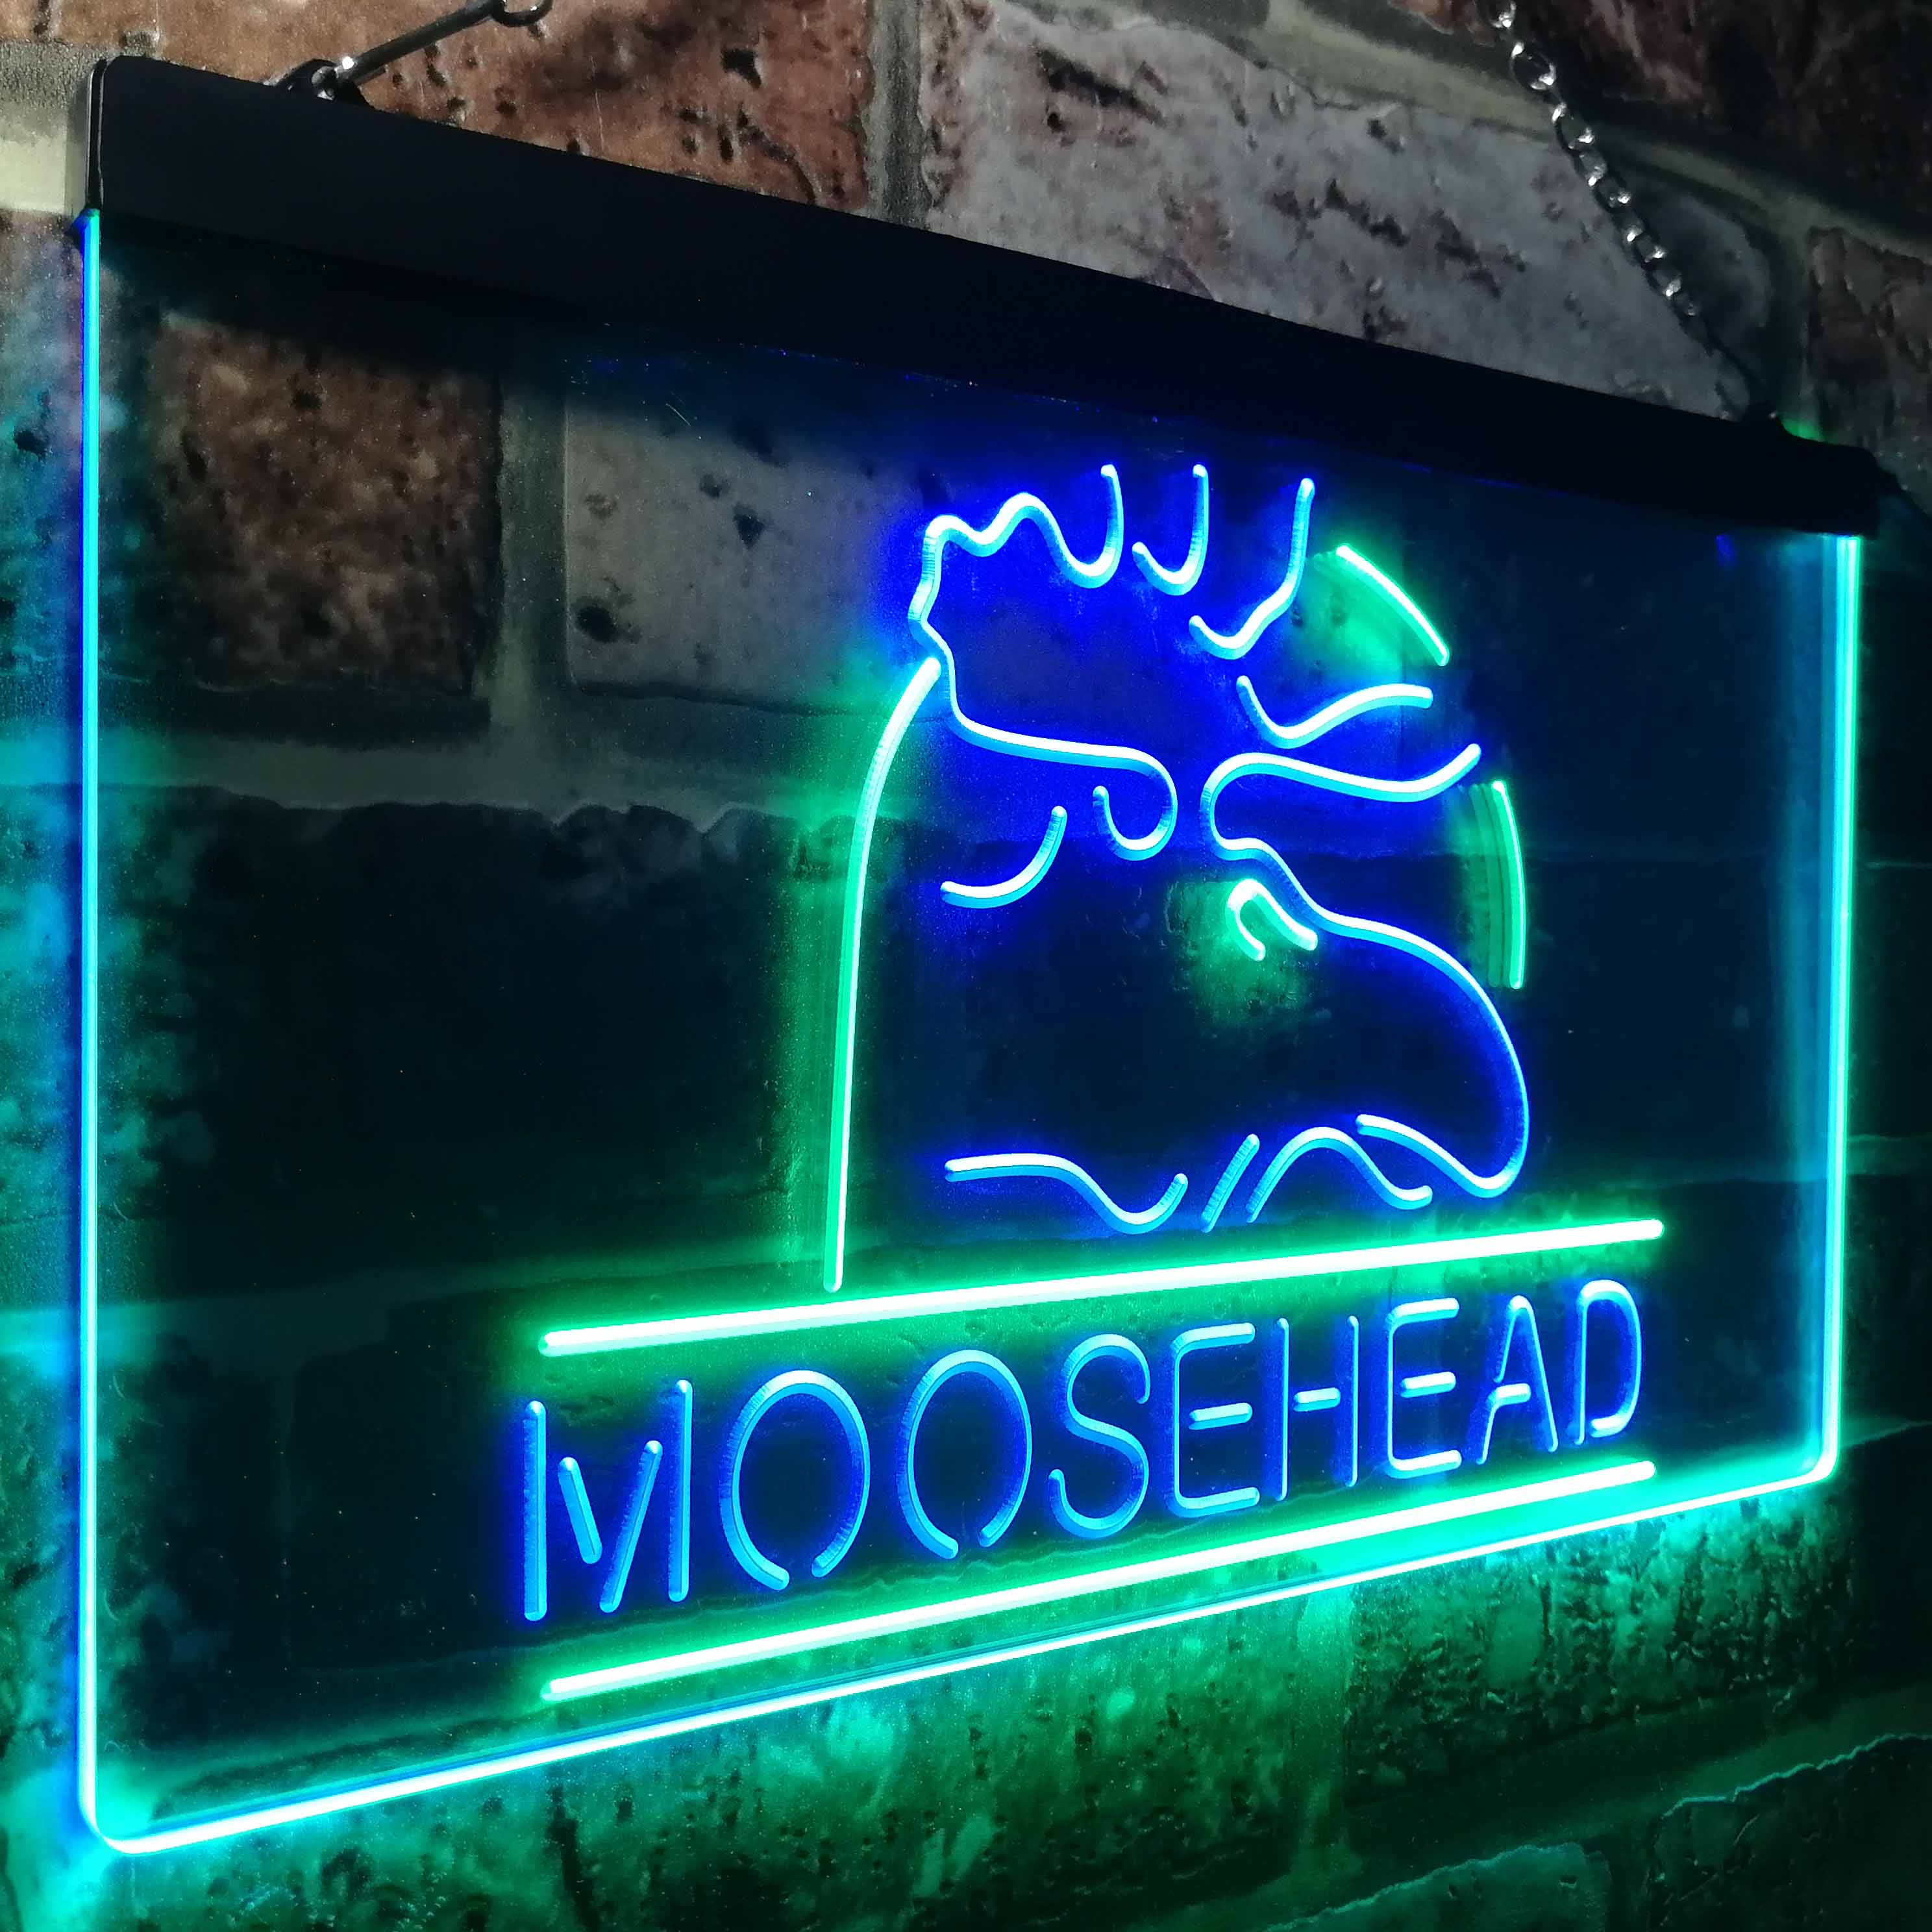 Moosehead Lager Beer Man Cave Neon LED Sign